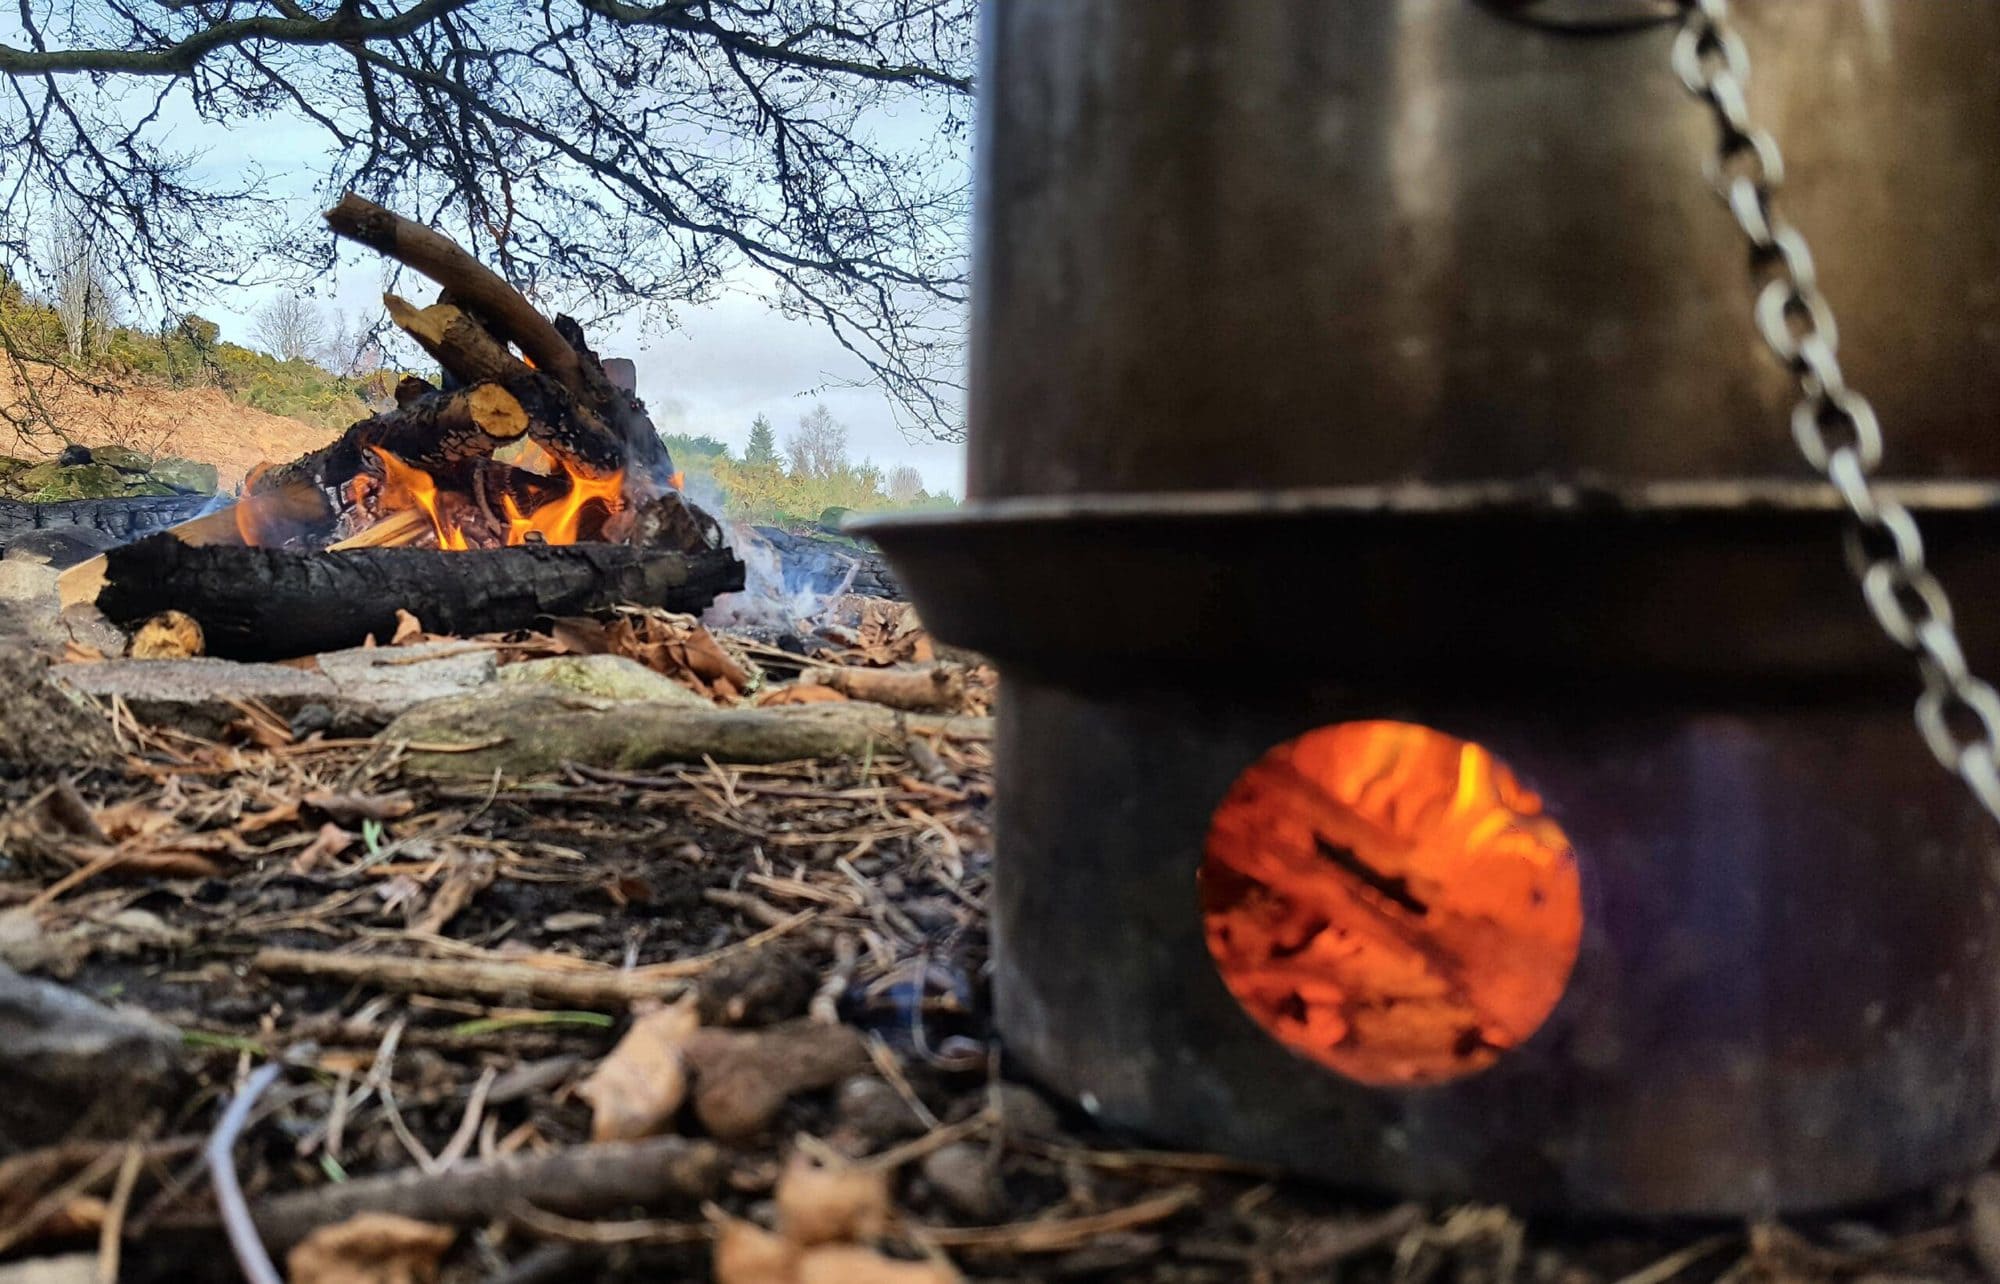 N4H - open fire and wood stove outdoors